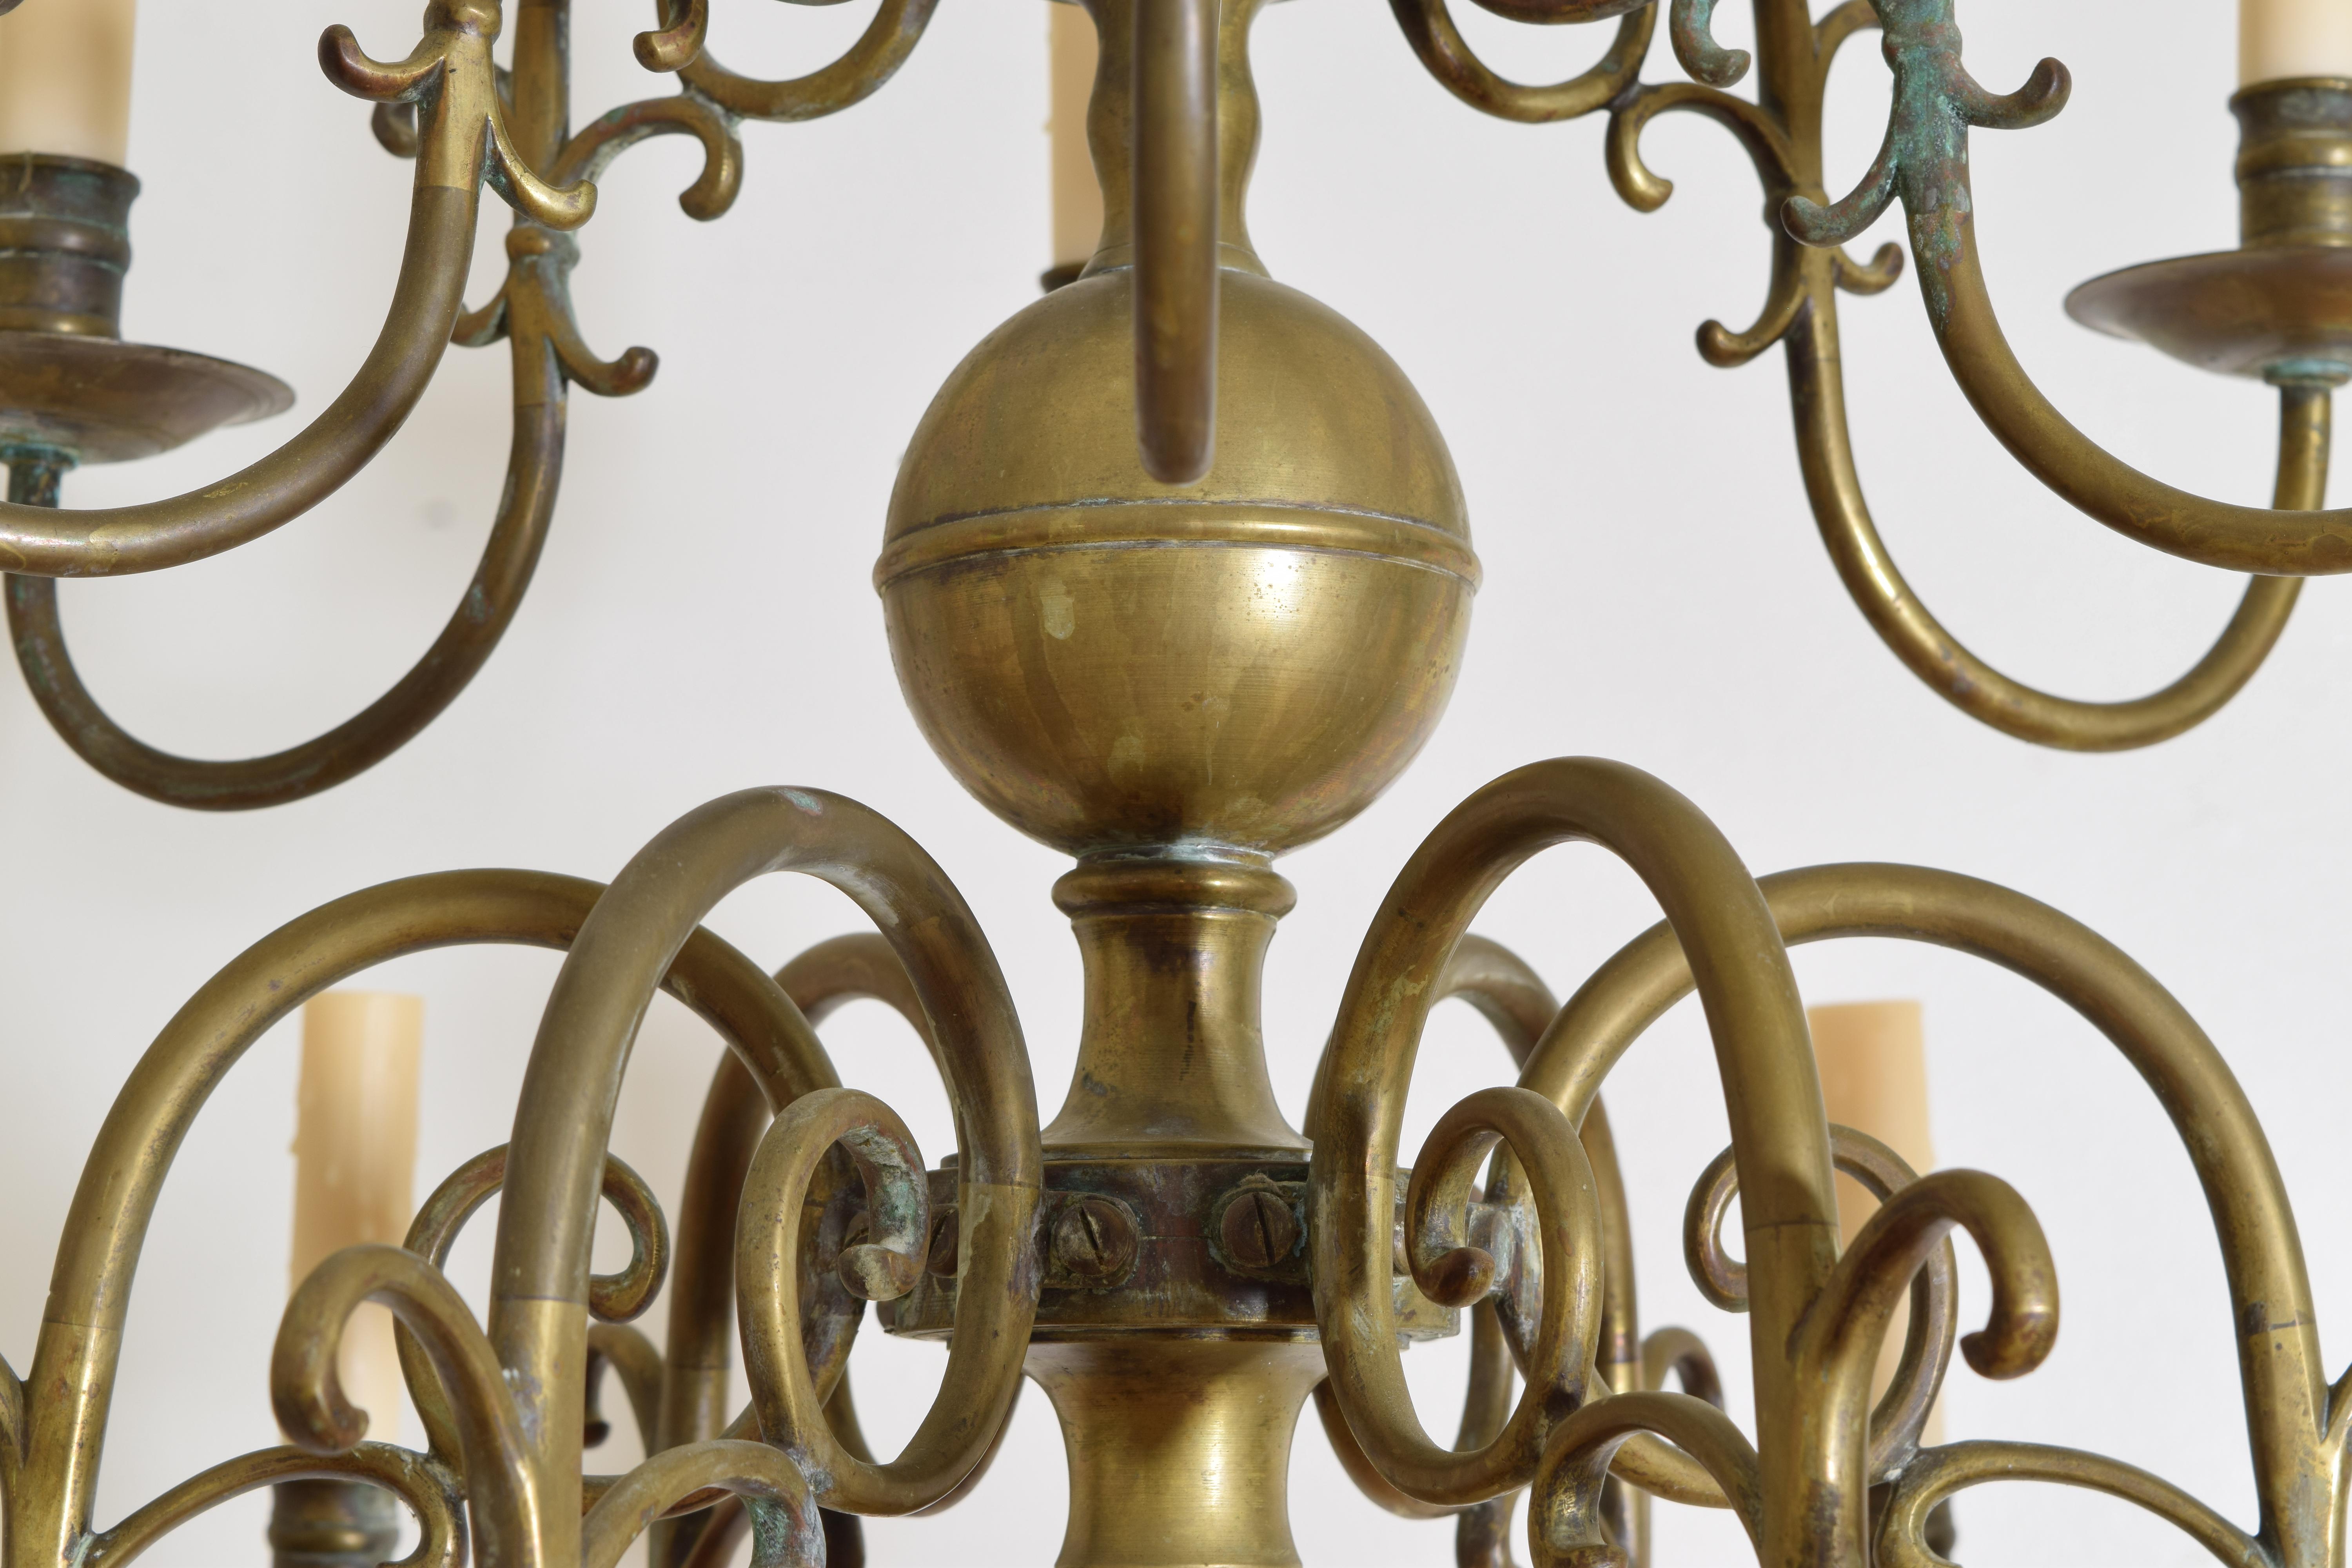 Dutch or French Patinated Brass 2-Tier 12-Light Chandelier, 2nd half 19th cen. For Sale 3